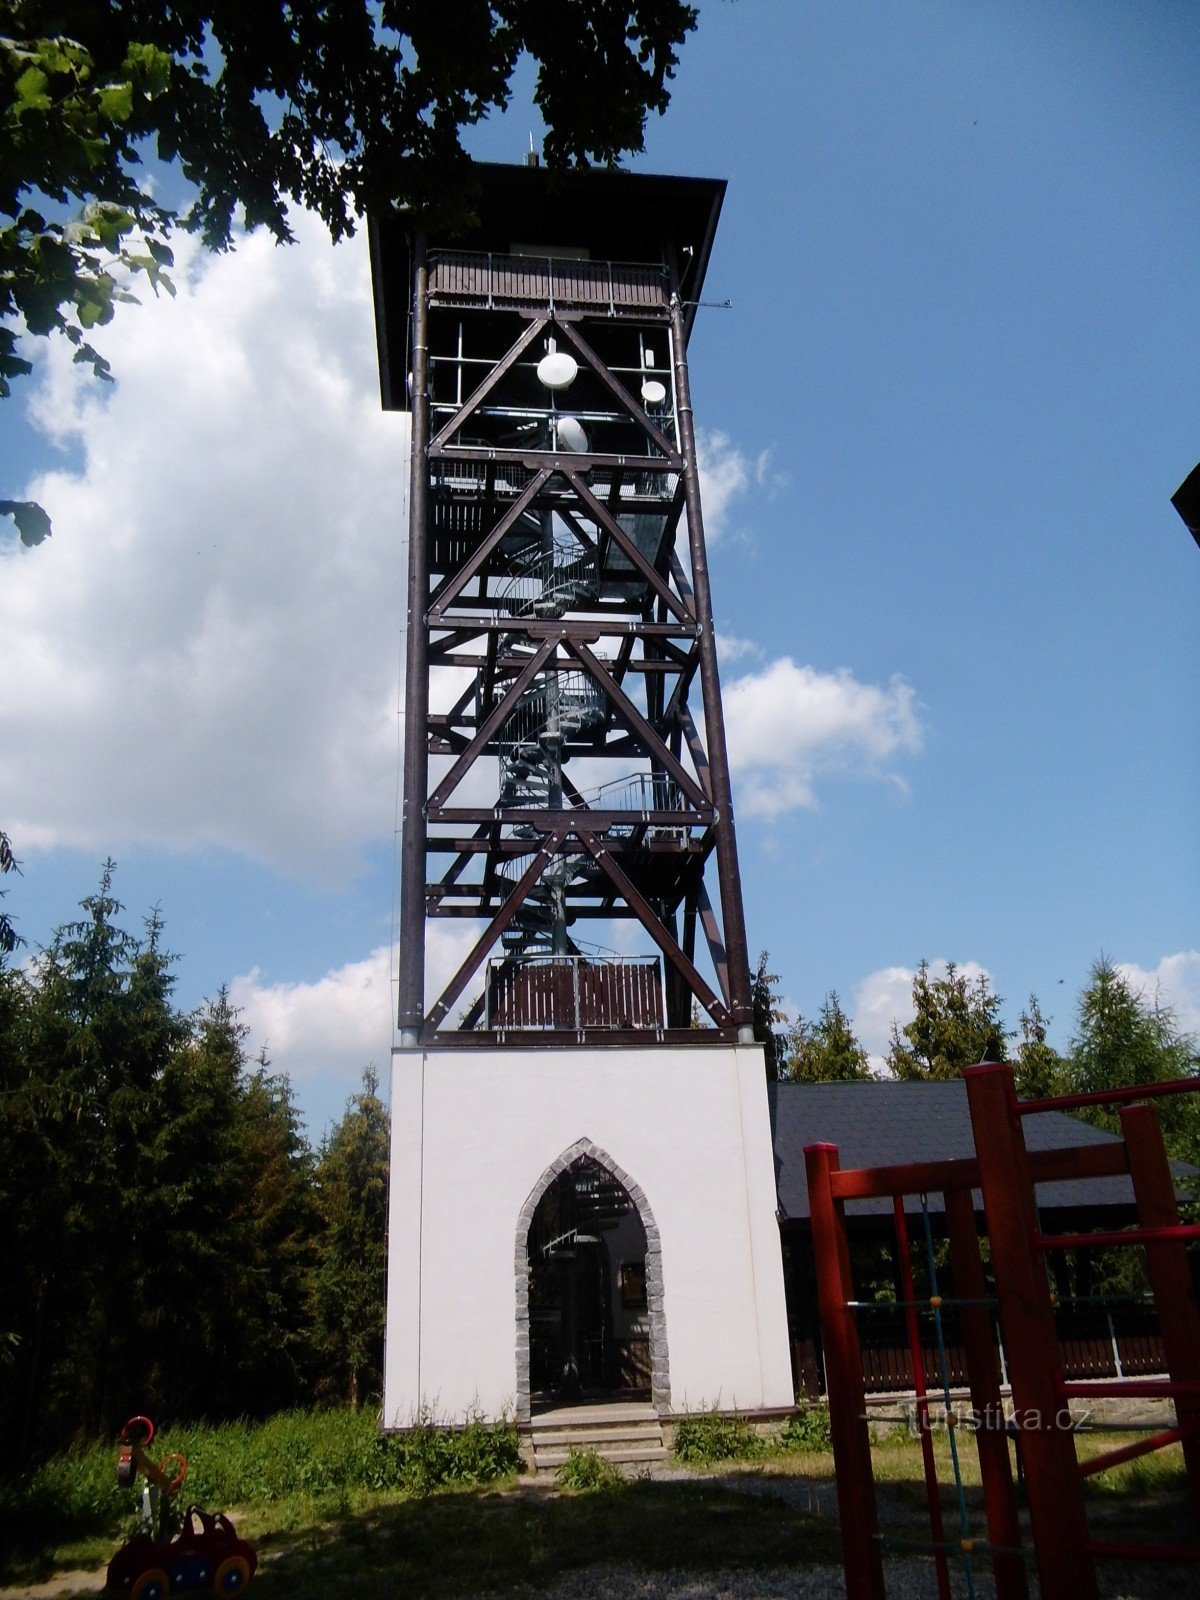 From Pocinovice to Kdyn via the lookout tower and the chapel of St. Markets